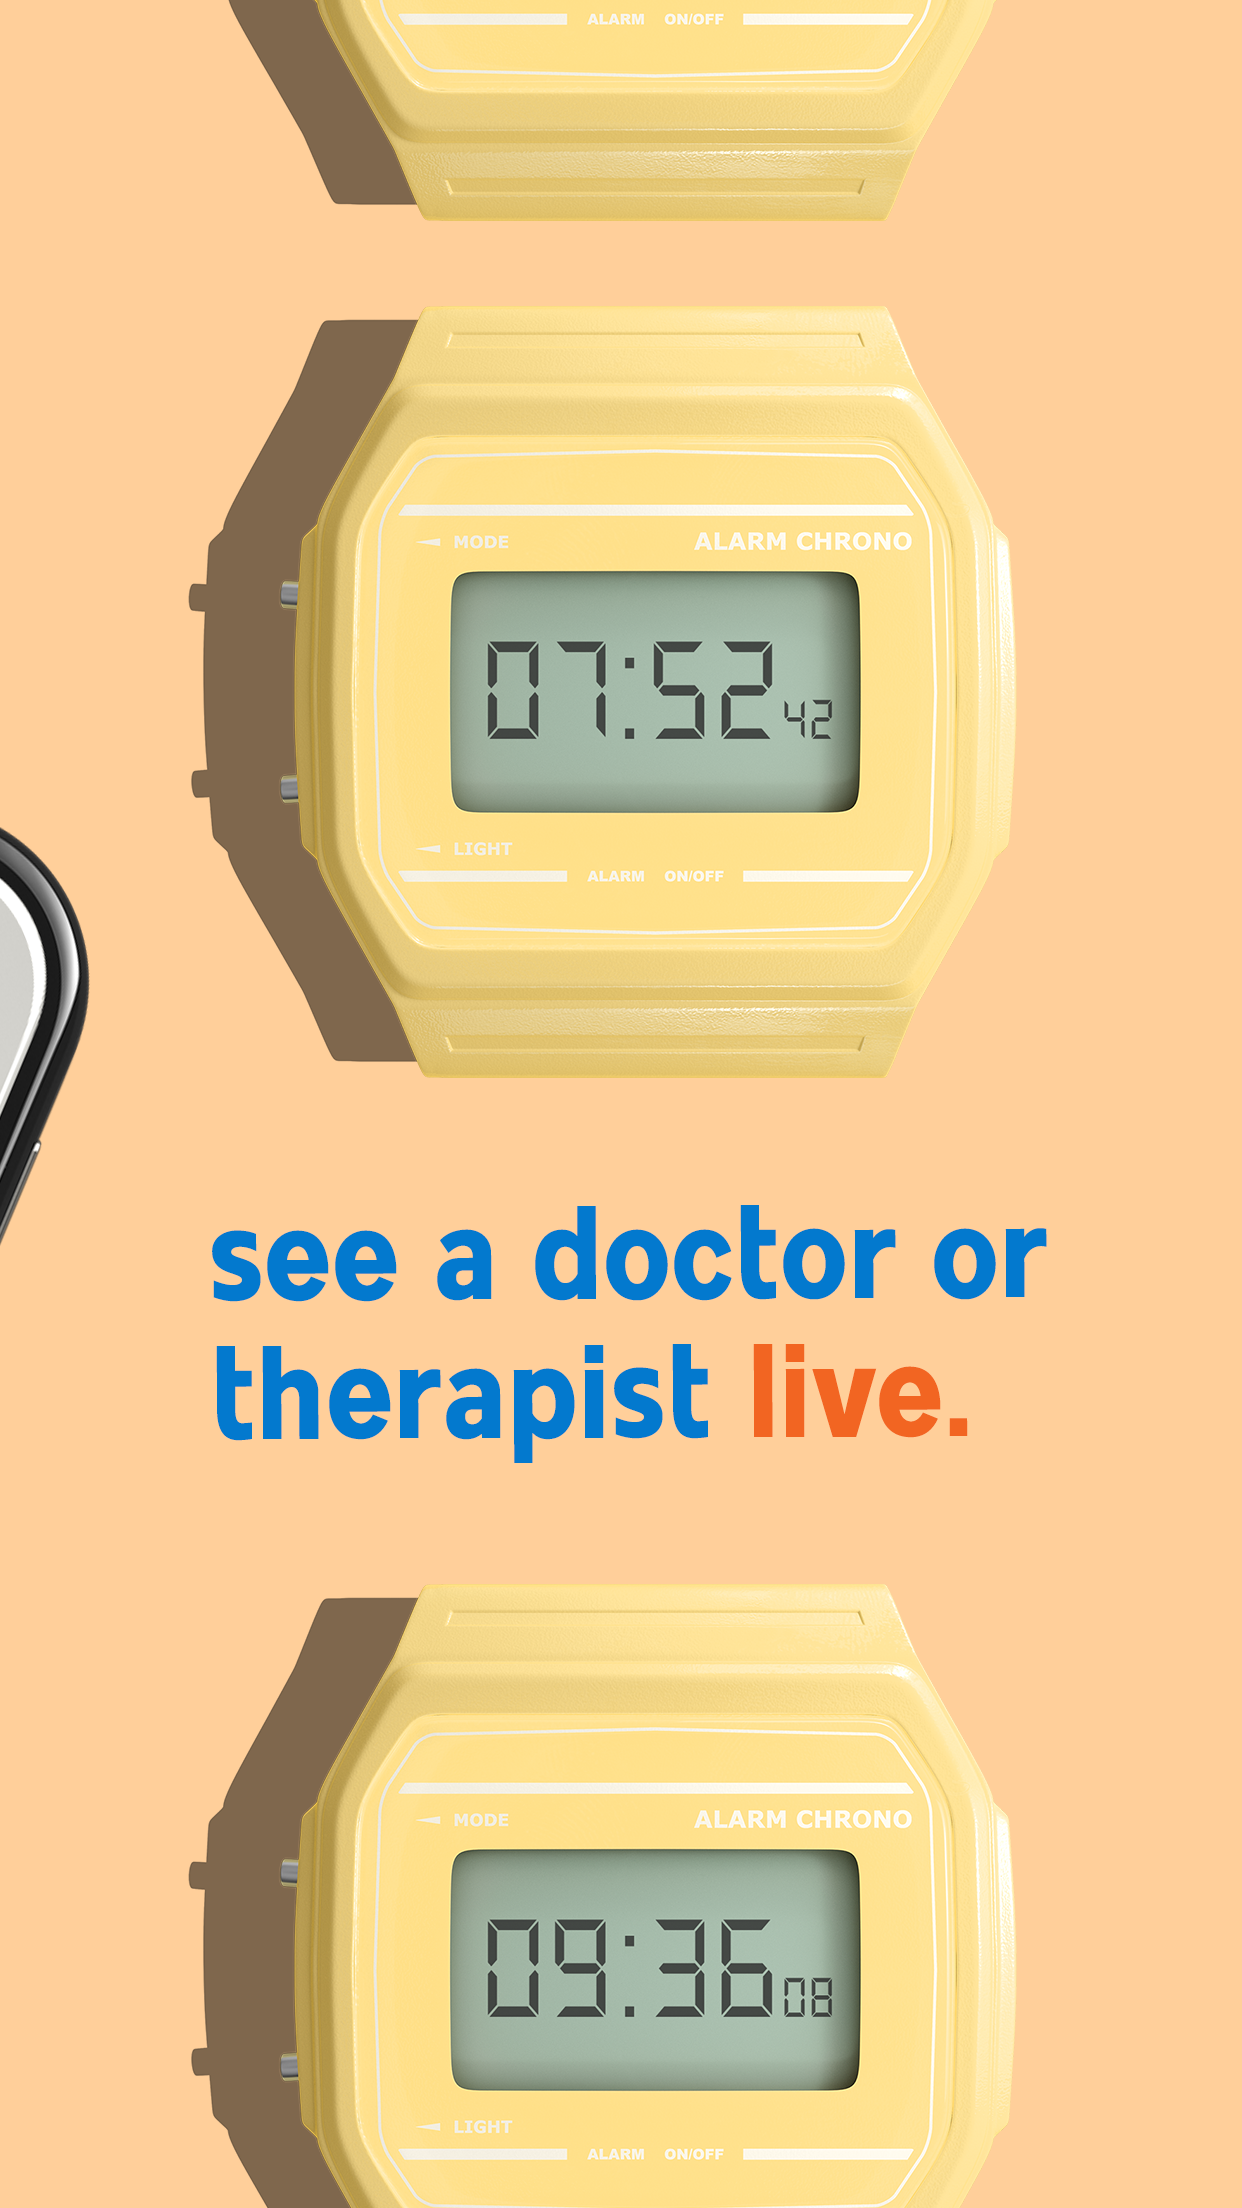 Android application MDLIVE: Talk to a Doctor 24/7 screenshort